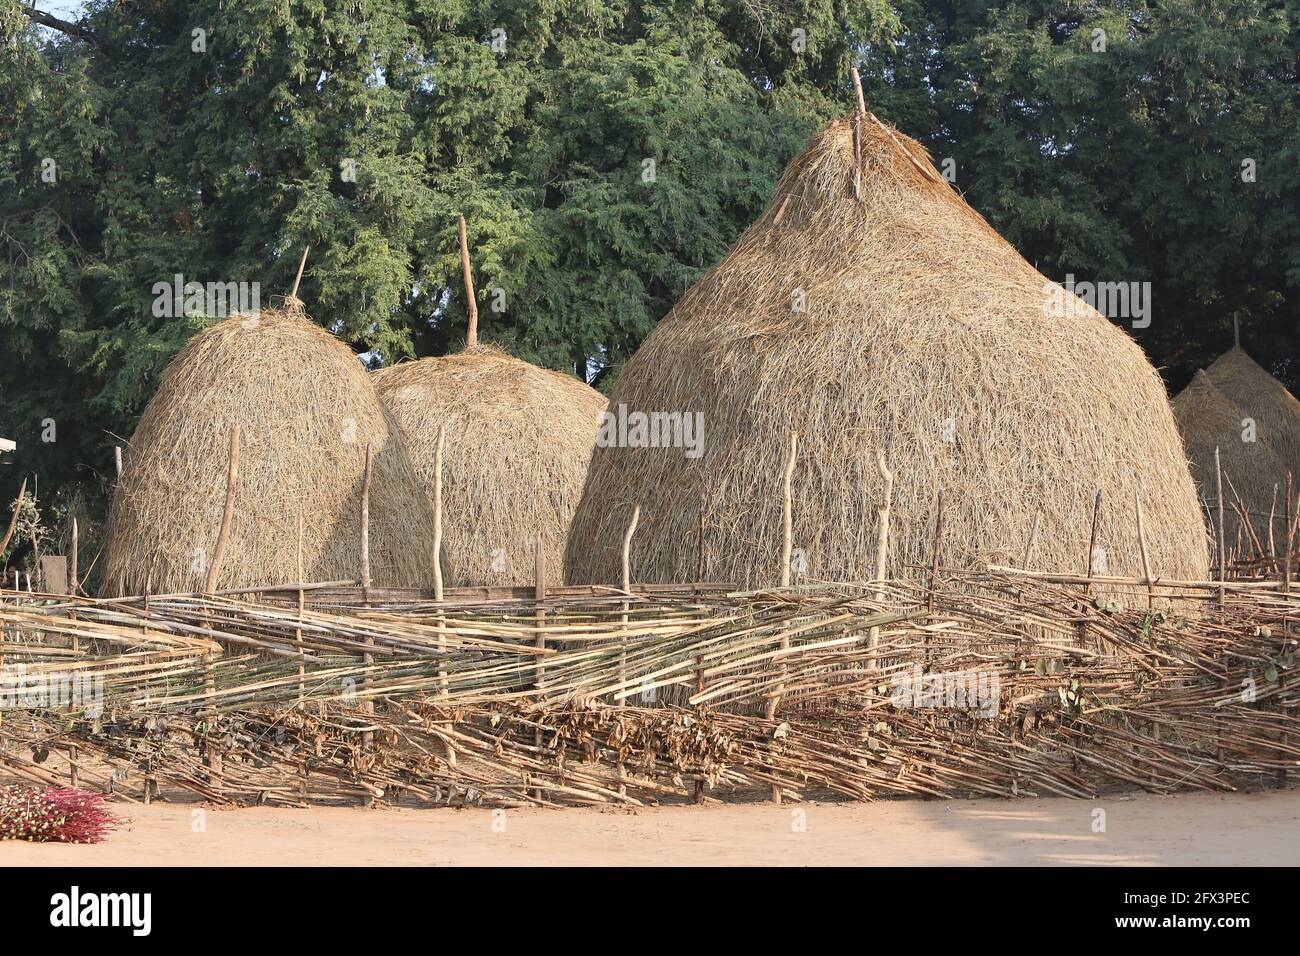 LANJIA SAORA TRIBE - Dry paddy collection or haystacks for animals. Puttasingh tribal village of Odisha, India Stock Photo